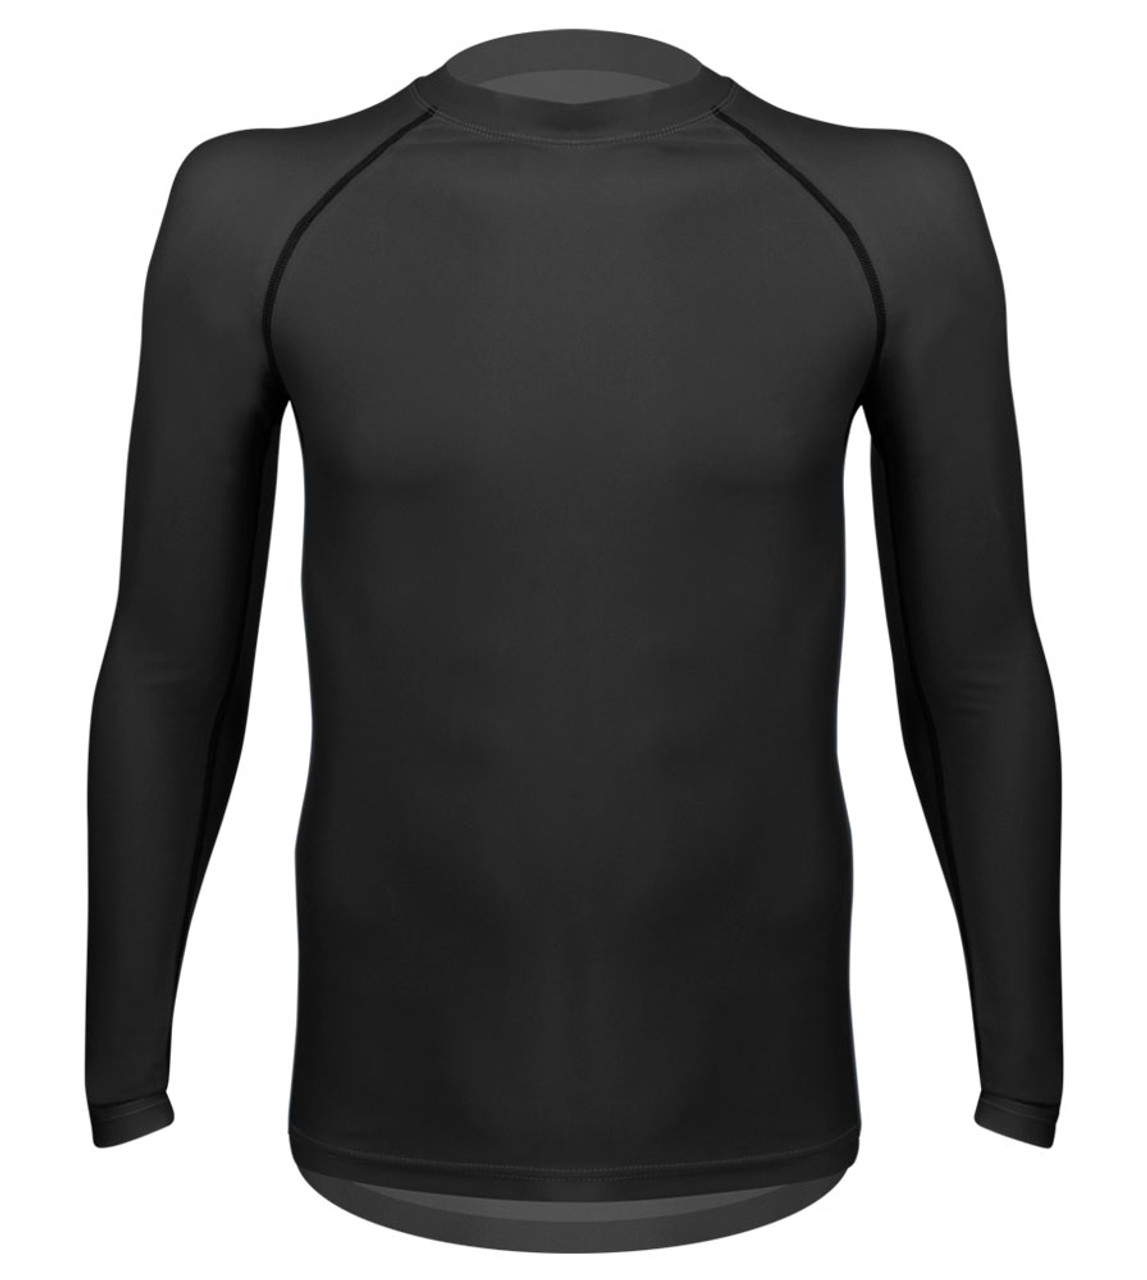 Long Sleeve Spandex Compression Base Layer in Black, Gray, and White